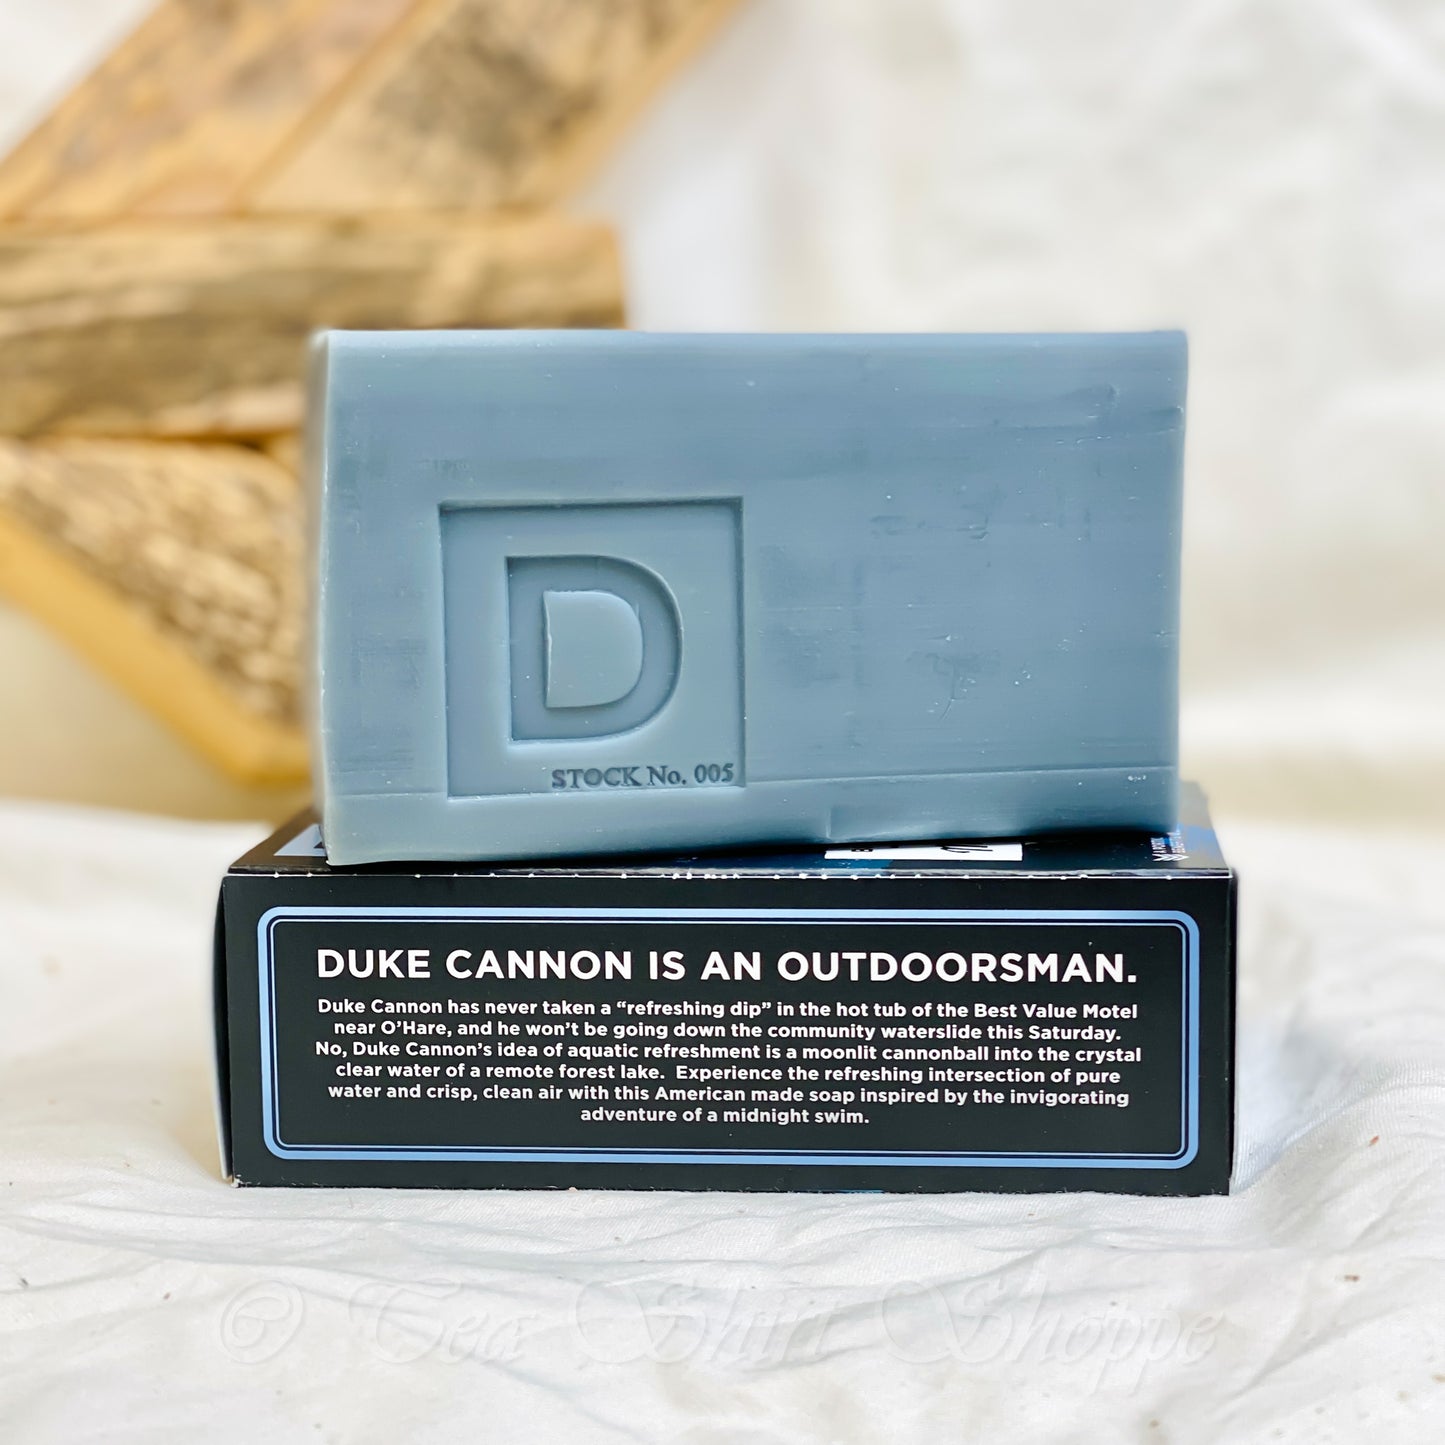 Part of the Great American Frontier Collection from Duke Cannon. Because the outdoors smell nice. PRODUCT SPECS: • Triple milled for superior quality • At 10 oz., it's 3x the size of common bar soaps • Made in the USA • Features a refreshing aquatic scent with green top notes Size: 10 oz. brick.